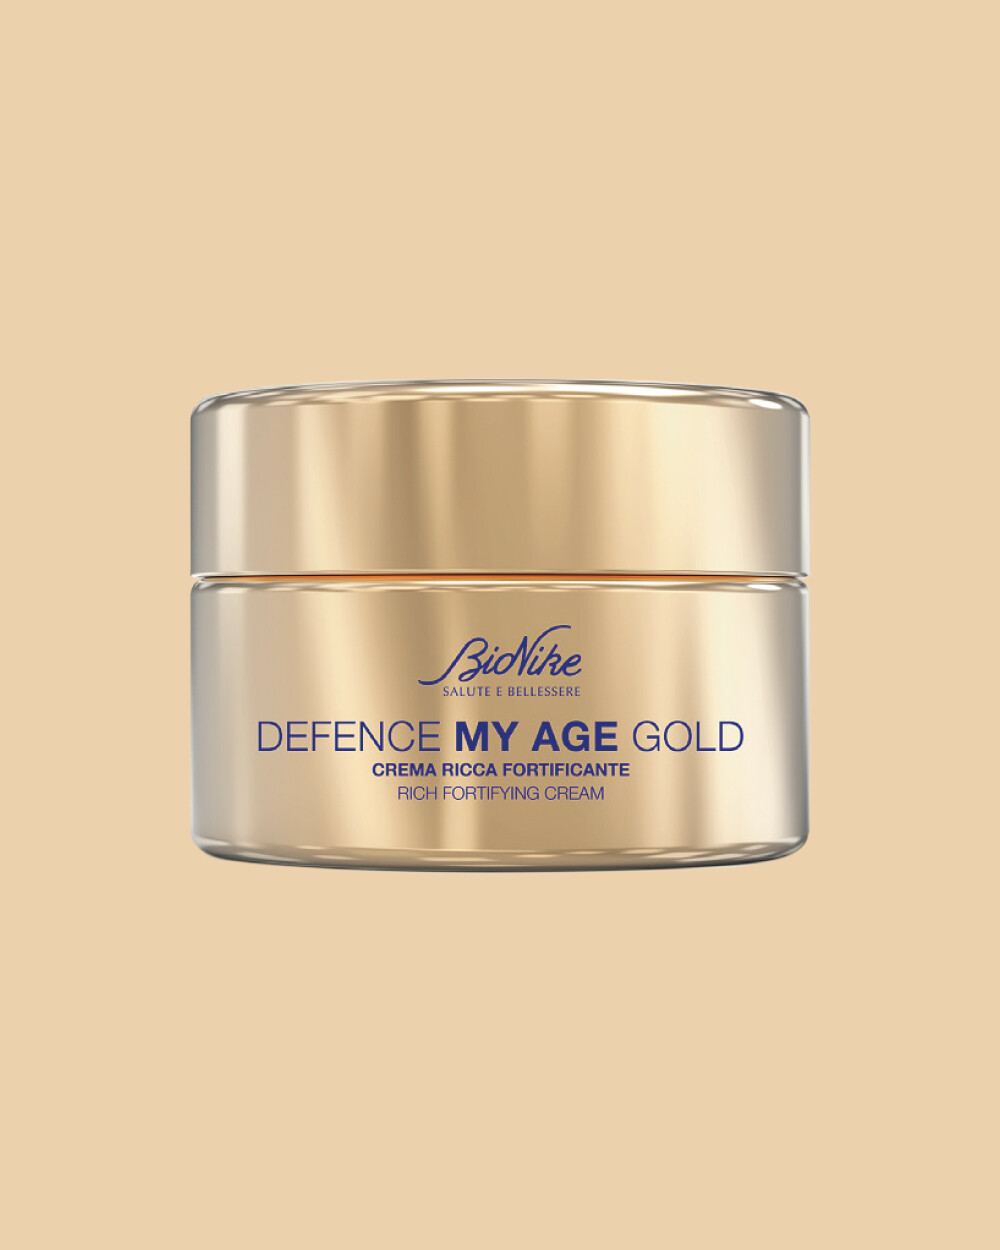 DEFENCE MY AGE GOLD CREMA RICCA FORTIFICANTE 50 ml